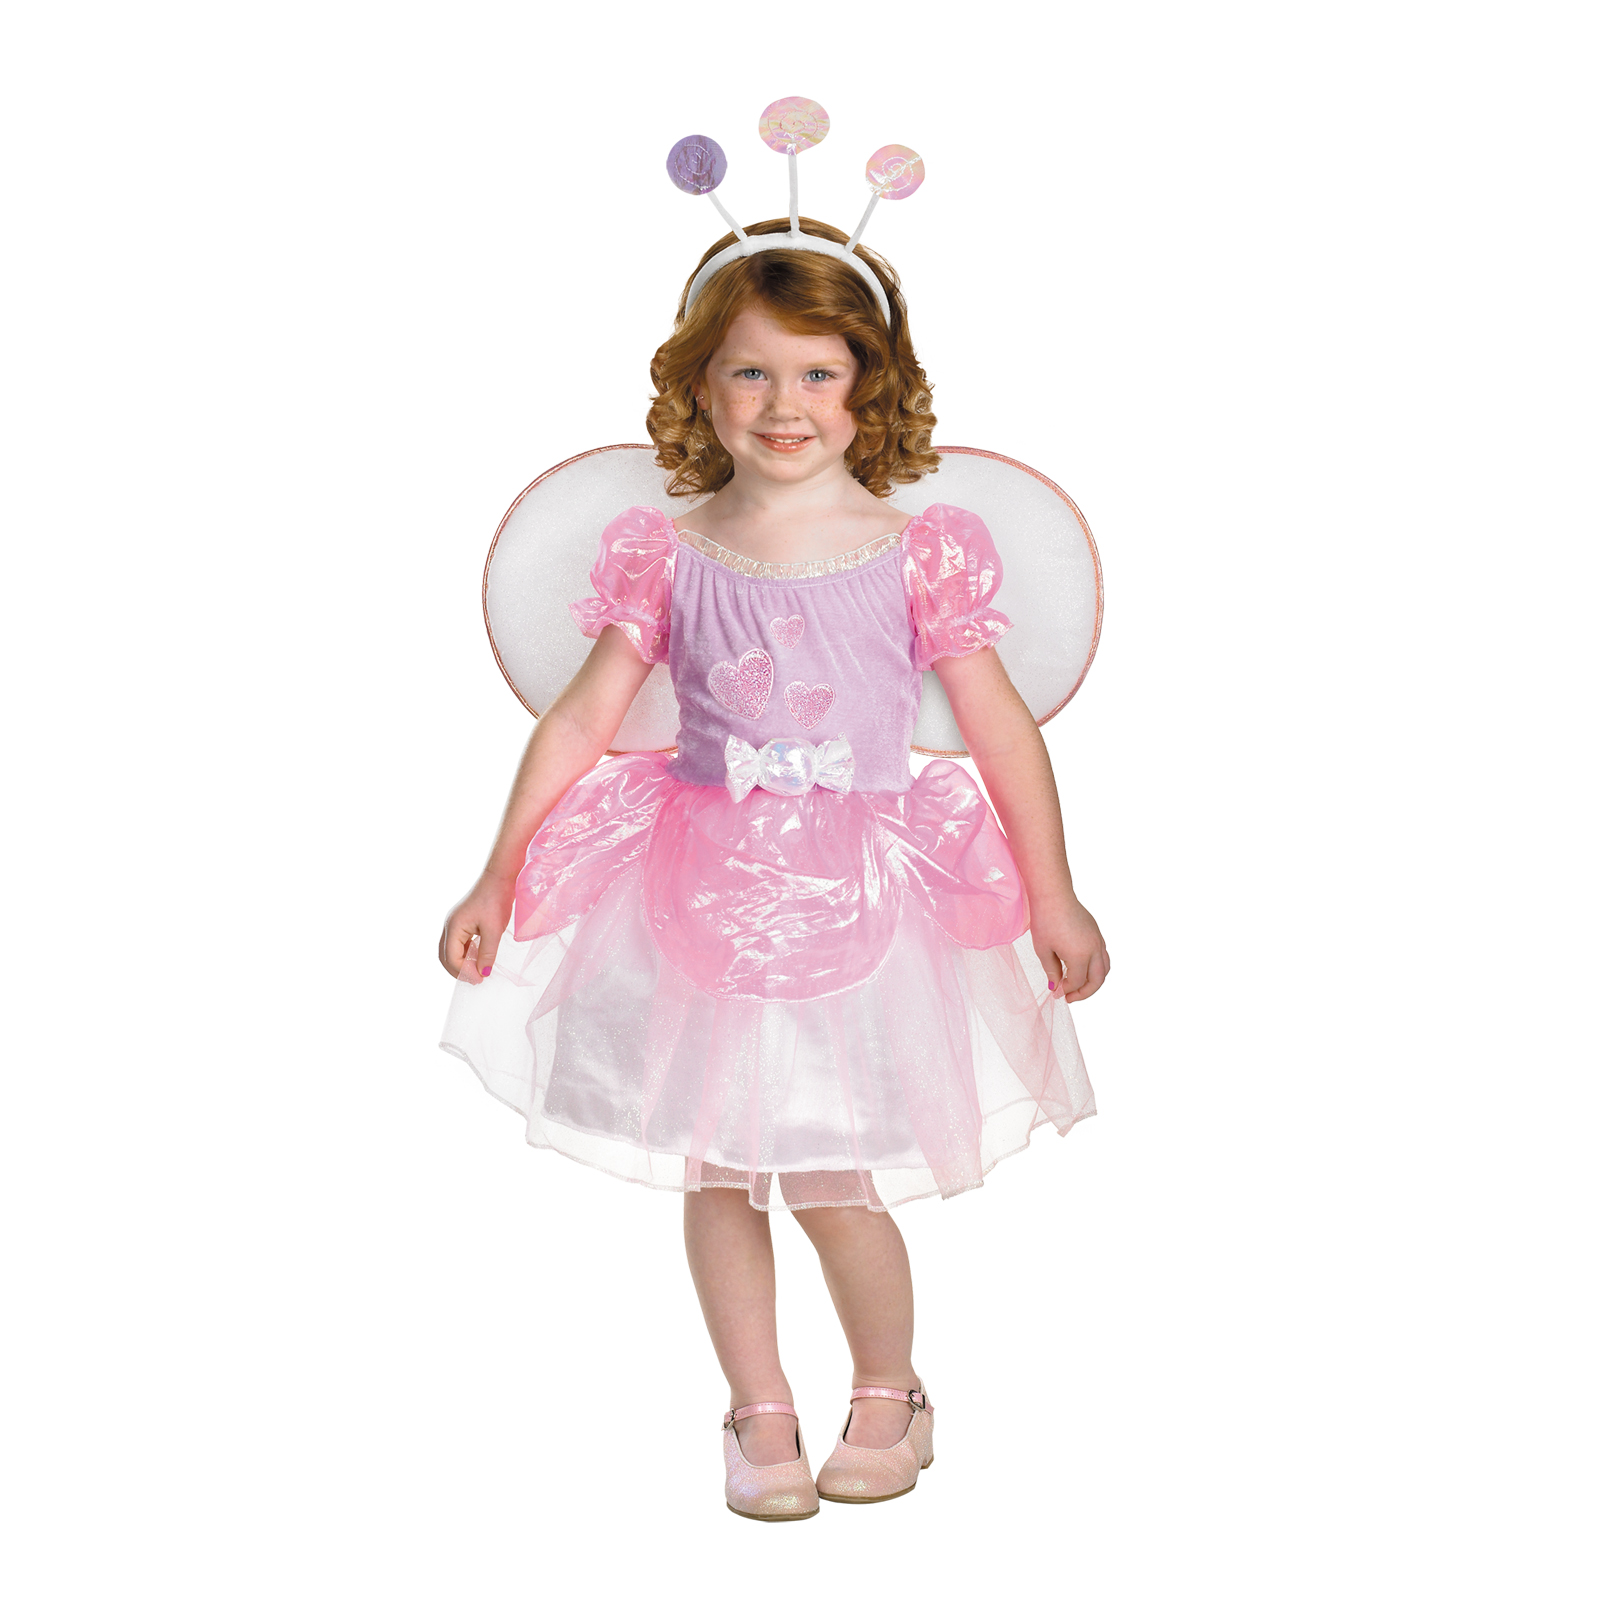 Infant Spider Halloween Costume Size: 1T-2T